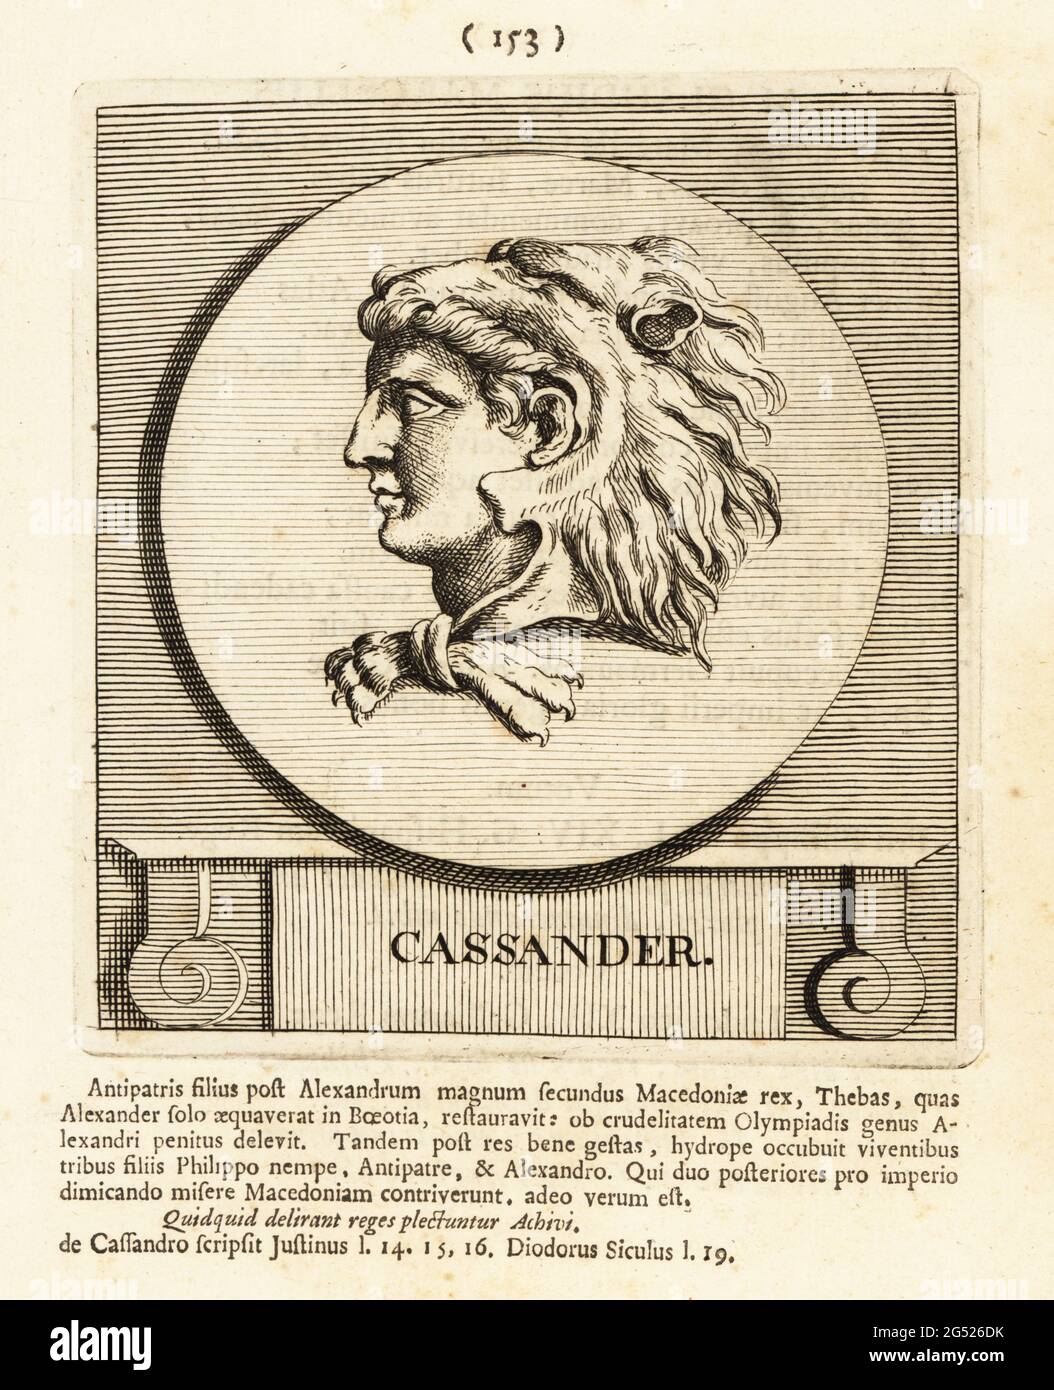 Cassander, c. 355 BC – 297 BC, king of the ancient kingdom of Macedon from 305 BC until 297 BC, and de facto ruler of southern Greece. Shown wearing a lion's head helmet with its paws tied at his neck. Copperplate engraving by Pieter Bodart (1676-1712) from Henricus Spoor’s Deorum et Heroum, Virorum et Mulierum Illustrium Imagines Antiquae Illustatae, Gods and Heroes, Men and Women, Illustrated with Antique Images, Petrum, Amsterdam, 1715. First published as Favissæ utriusque antiquitatis tam Romanæ quam Græcæ in 1707. Henricus Spoor was a Dutch physician, classical scholar, poet and writer, f Stock Photo